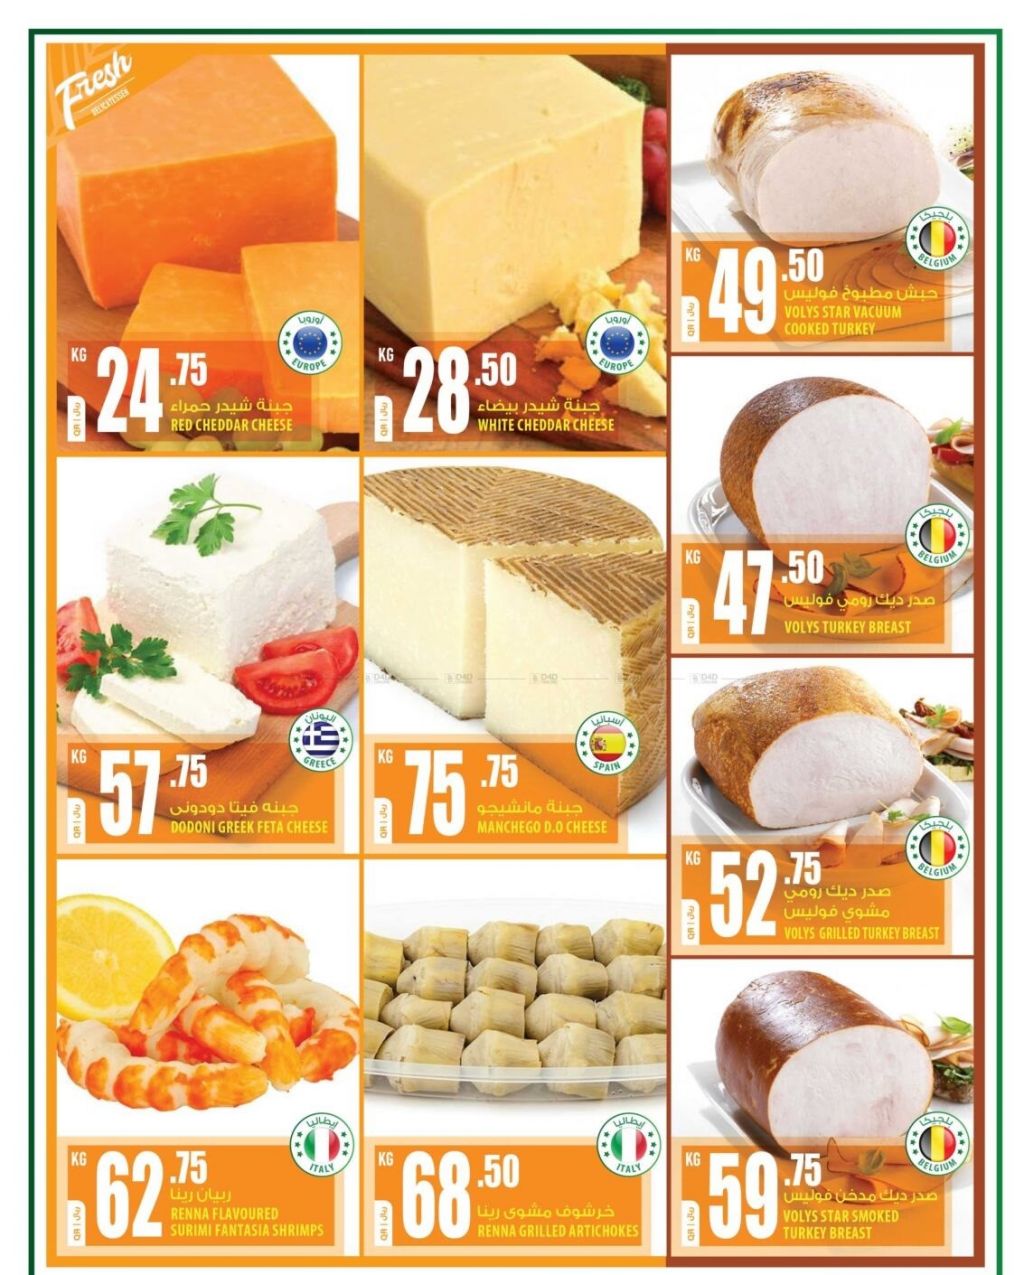 Meat & Seafood Promotions offer - in Doha #95 - 1  image 